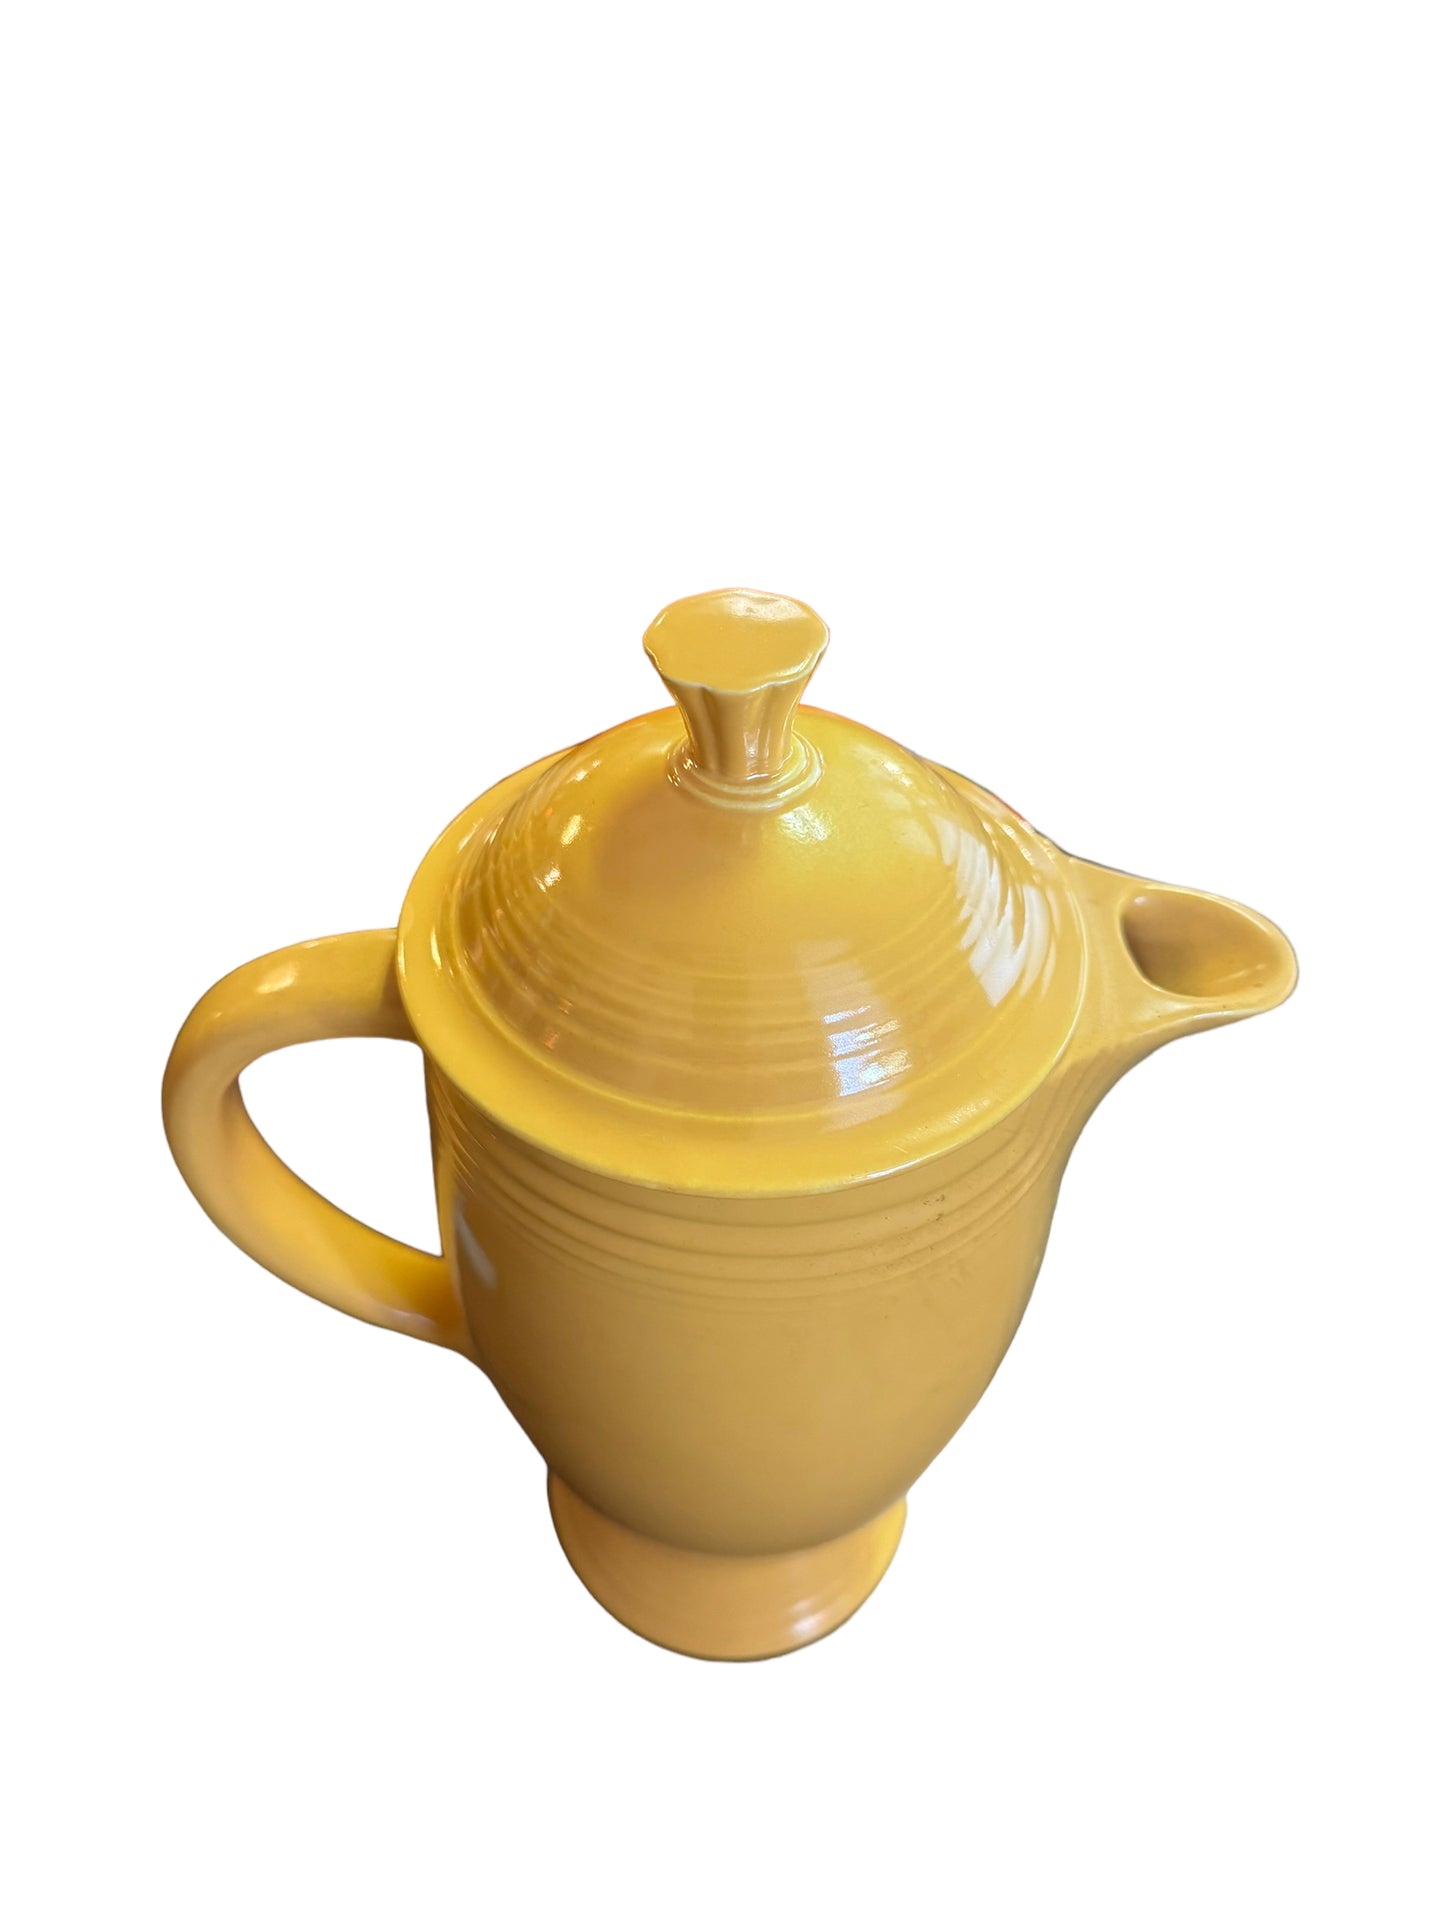 Fiesta Large Vintage Coffee Pot in Yellow -2-